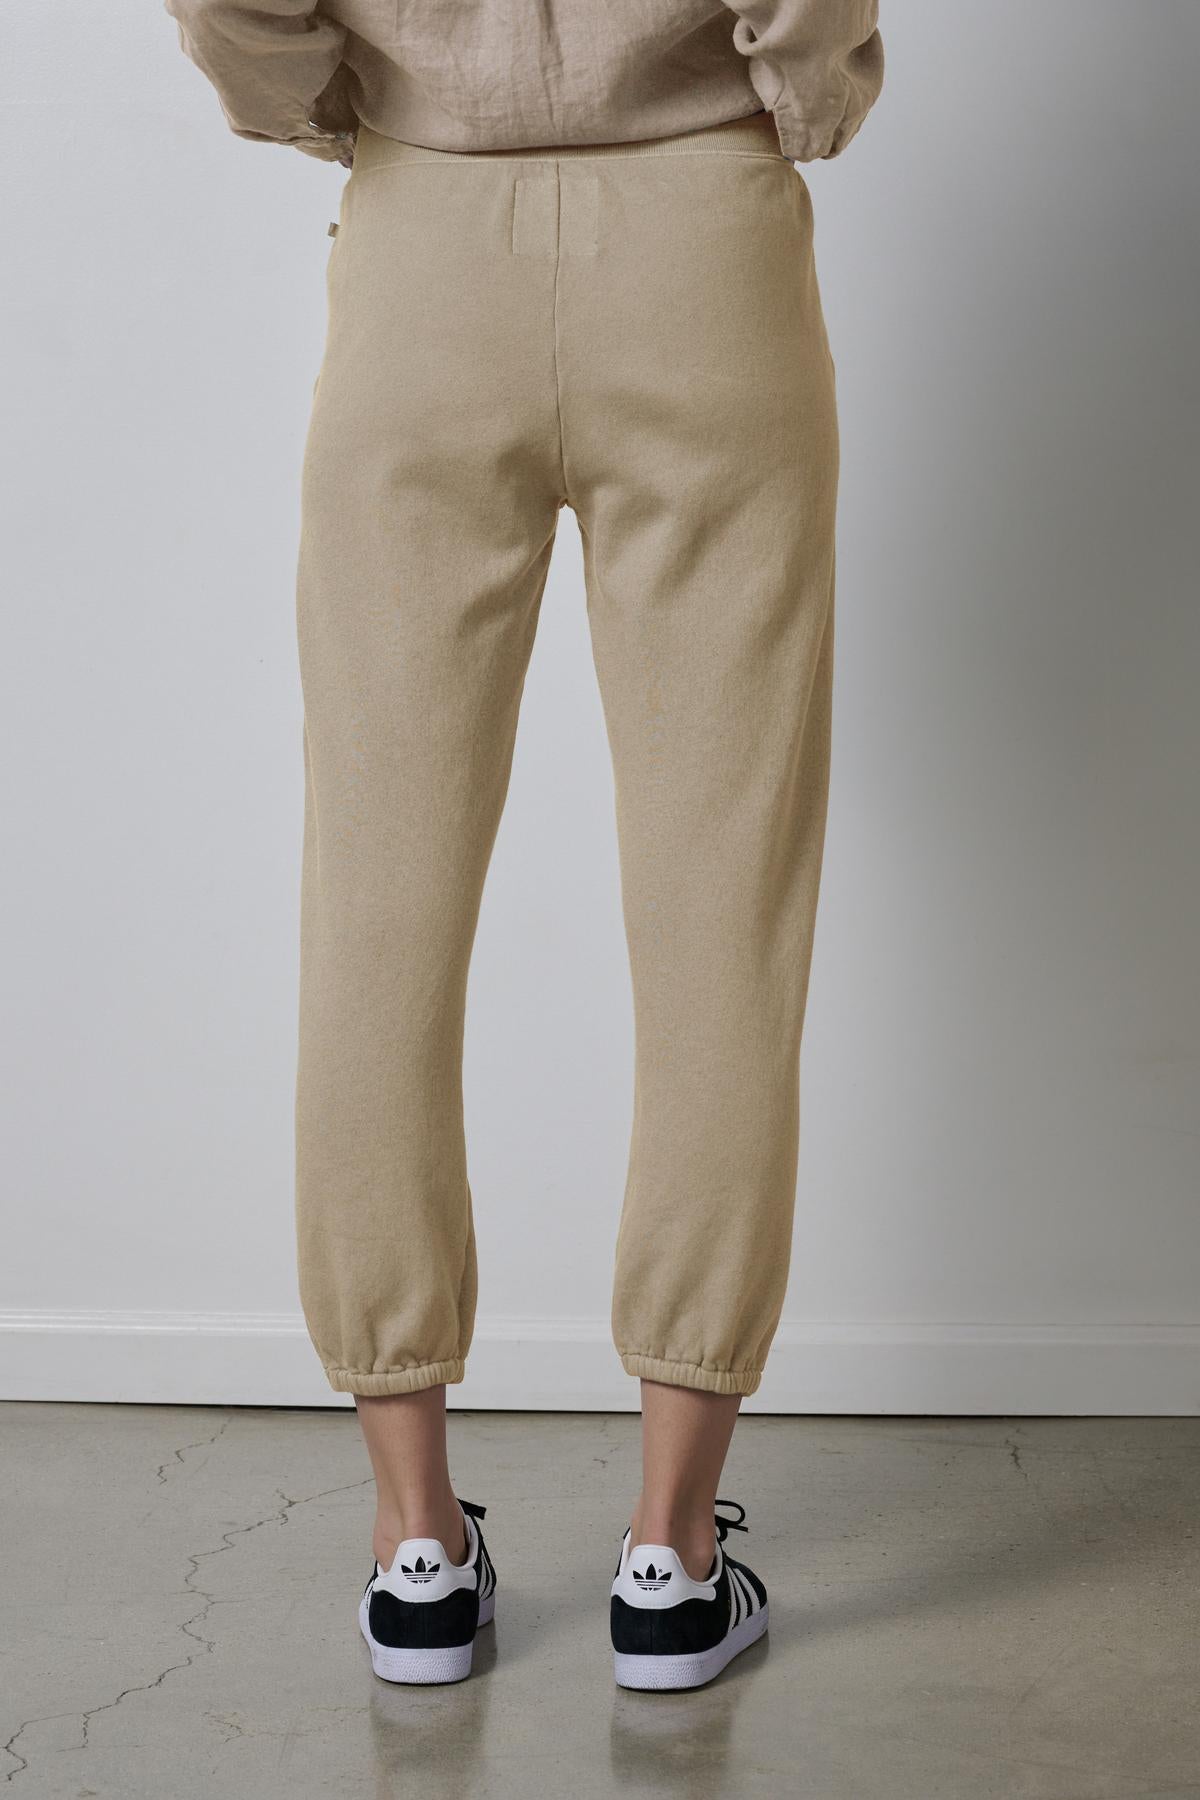 Person standing in Velvet by Jenny Graham ZUMA SWEATPANT and black-and-white sneakers.-36463615639745